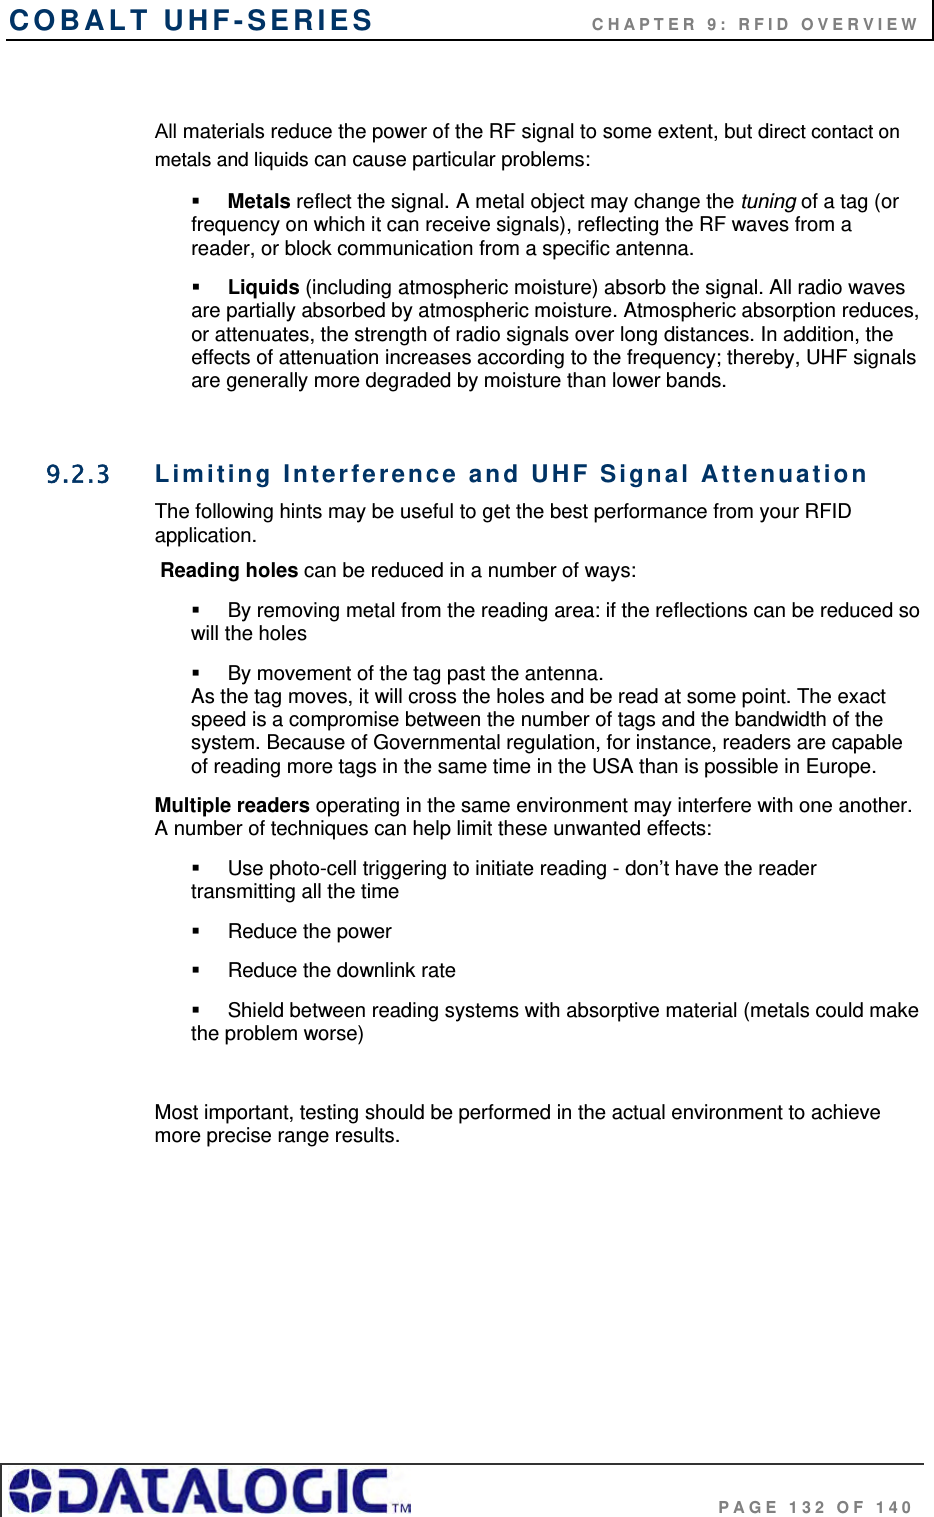 COBALT UHF-SERIES      CHAPTER 9: RFID OVERVIEW                                     PAGE 132 OF 140  All materials reduce the power of the RF signal to some extent, but direct contact on metals and liquids can cause particular problems:  Metals reflect the signal. A metal object may change the tuning of a tag (or frequency on which it can receive signals), reflecting the RF waves from a reader, or block communication from a specific antenna.  Liquids (including atmospheric moisture) absorb the signal. All radio waves are partially absorbed by atmospheric moisture. Atmospheric absorption reduces, or attenuates, the strength of radio signals over long distances. In addition, the effects of attenuation increases according to the frequency; thereby, UHF signals are generally more degraded by moisture than lower bands.  9.2.3  Limiting Interference and UHF Signal Attenuation The following hints may be useful to get the best performance from your RFID application.  Reading holes can be reduced in a number of ways:   By removing metal from the reading area: if the reflections can be reduced so will the holes   By movement of the tag past the antenna.  As the tag moves, it will cross the holes and be read at some point. The exact speed is a compromise between the number of tags and the bandwidth of the system. Because of Governmental regulation, for instance, readers are capable of reading more tags in the same time in the USA than is possible in Europe. Multiple readers operating in the same environment may interfere with one another. A number of techniques can help limit these unwanted effects:   Use photo-cell triggering to initiate reading - don’t have the reader transmitting all the time  Reduce the power  Reduce the downlink rate   Shield between reading systems with absorptive material (metals could make the problem worse)  Most important, testing should be performed in the actual environment to achieve more precise range results.     